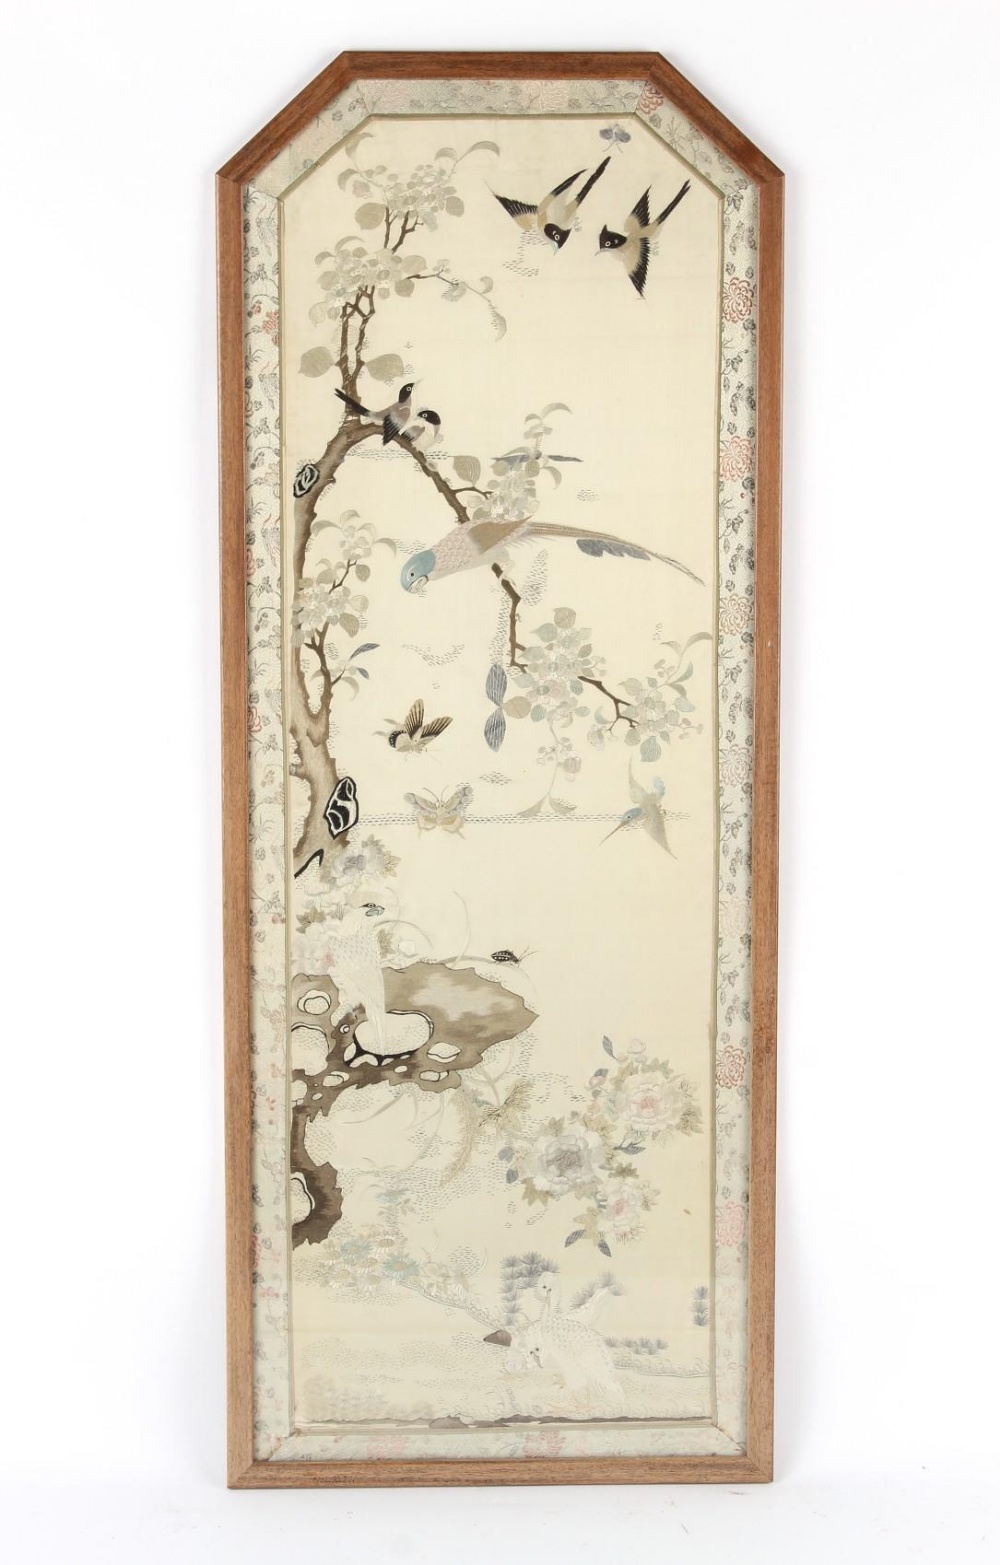 A late 19th / early 20th century Chinese embroidered silk panel depicting birds & insects among